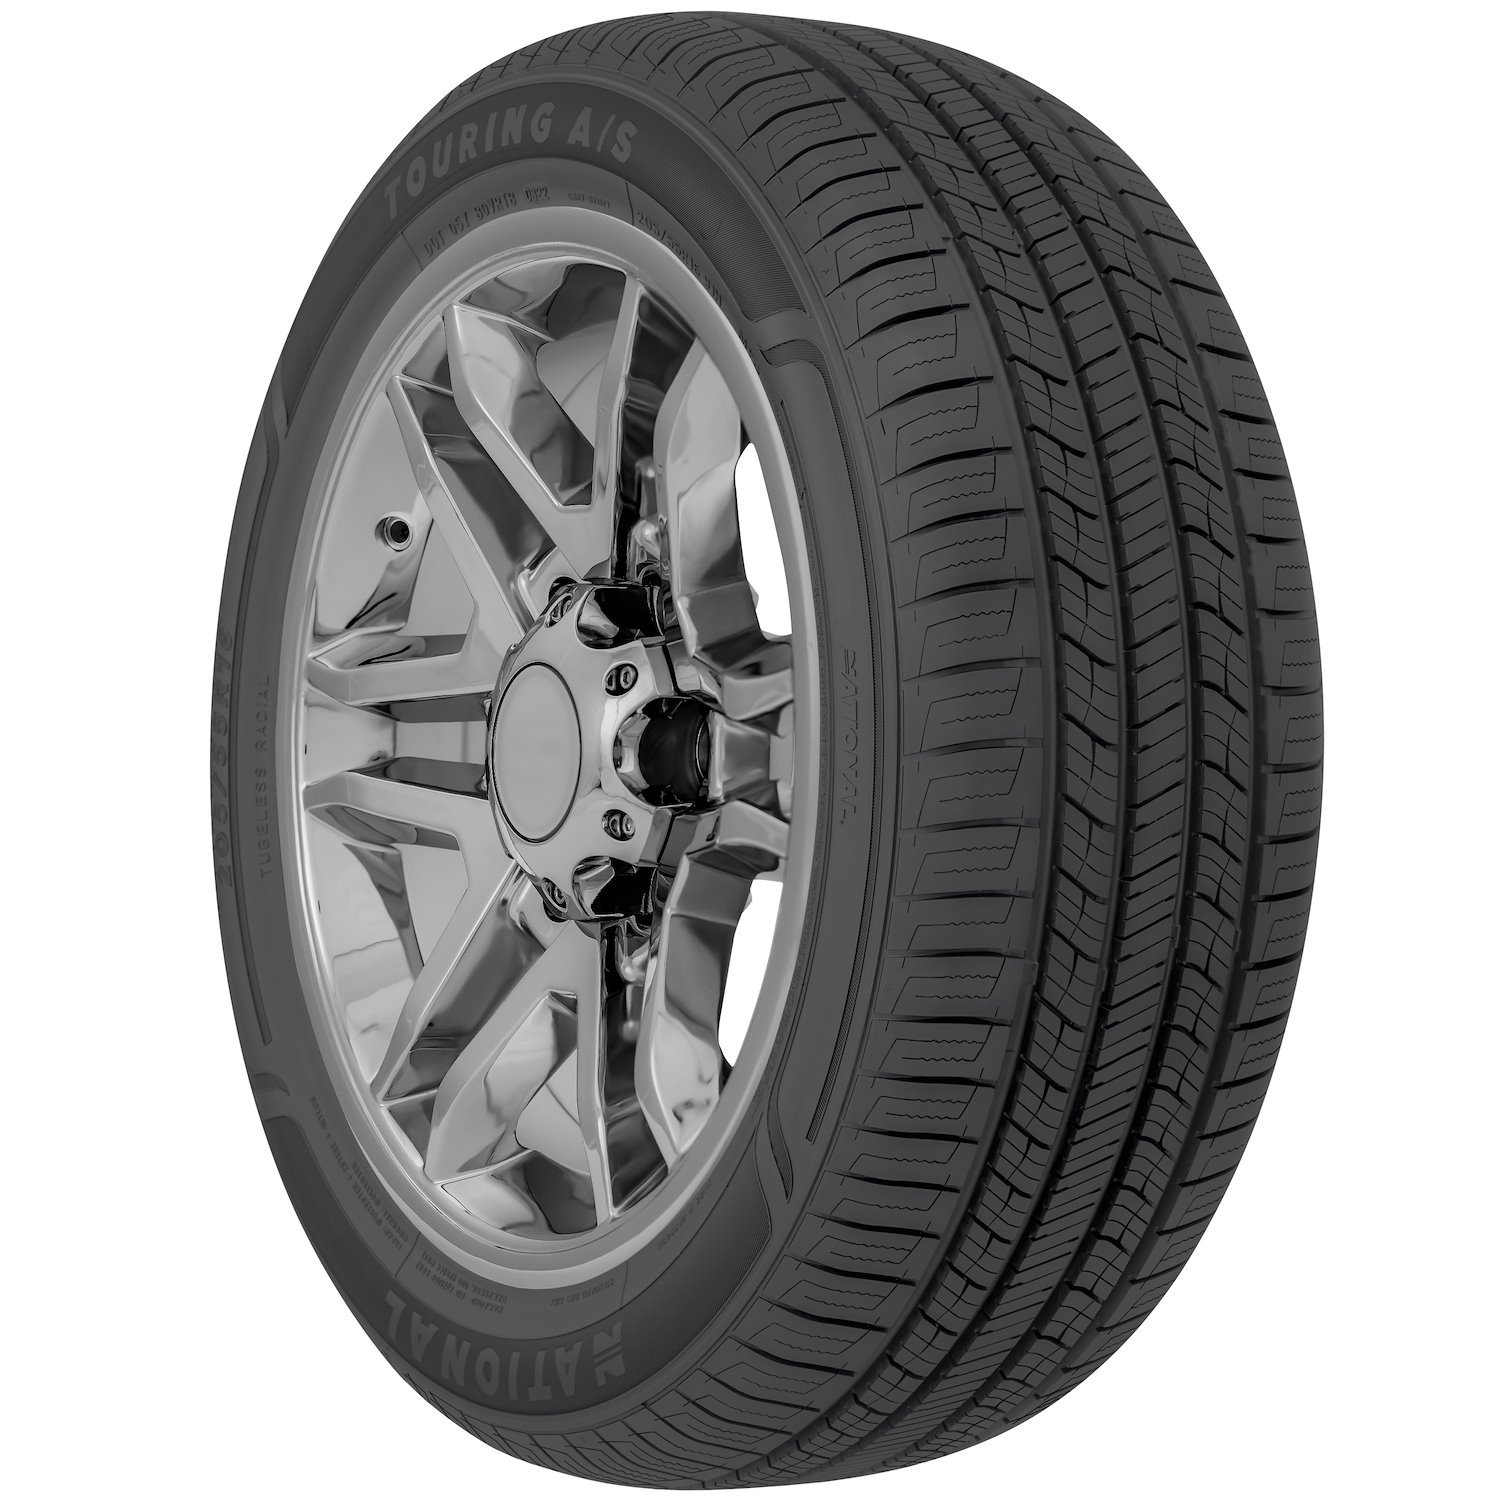 NLR79 Touring A/S Tire, 215/60R17